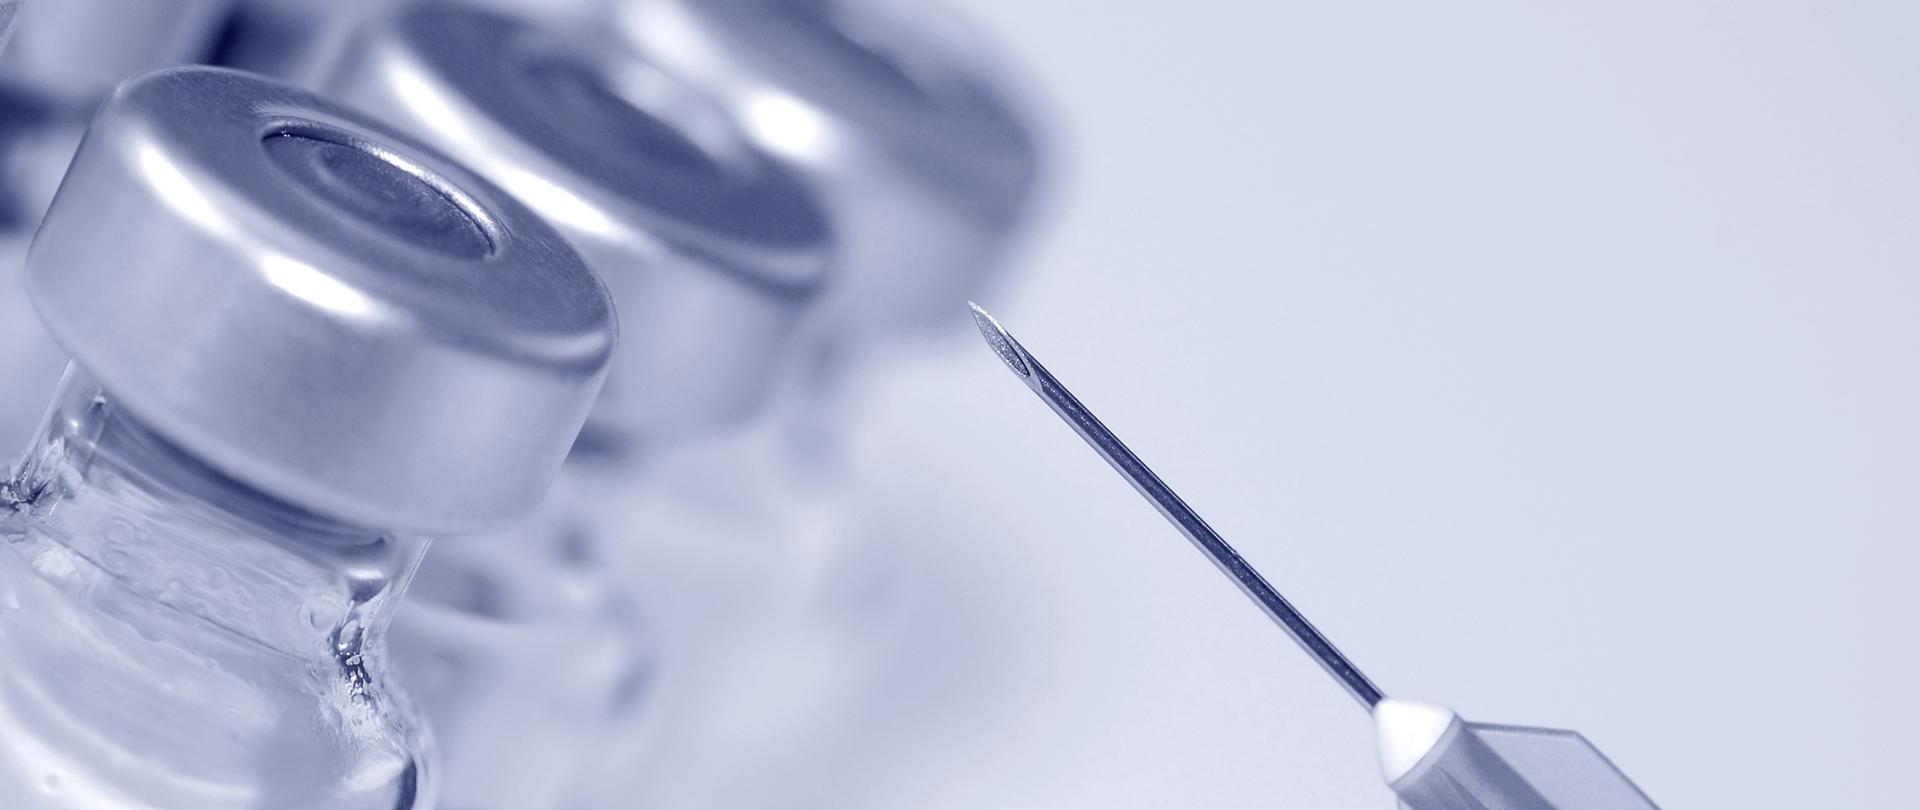 close-up of syringe needle and glass phials